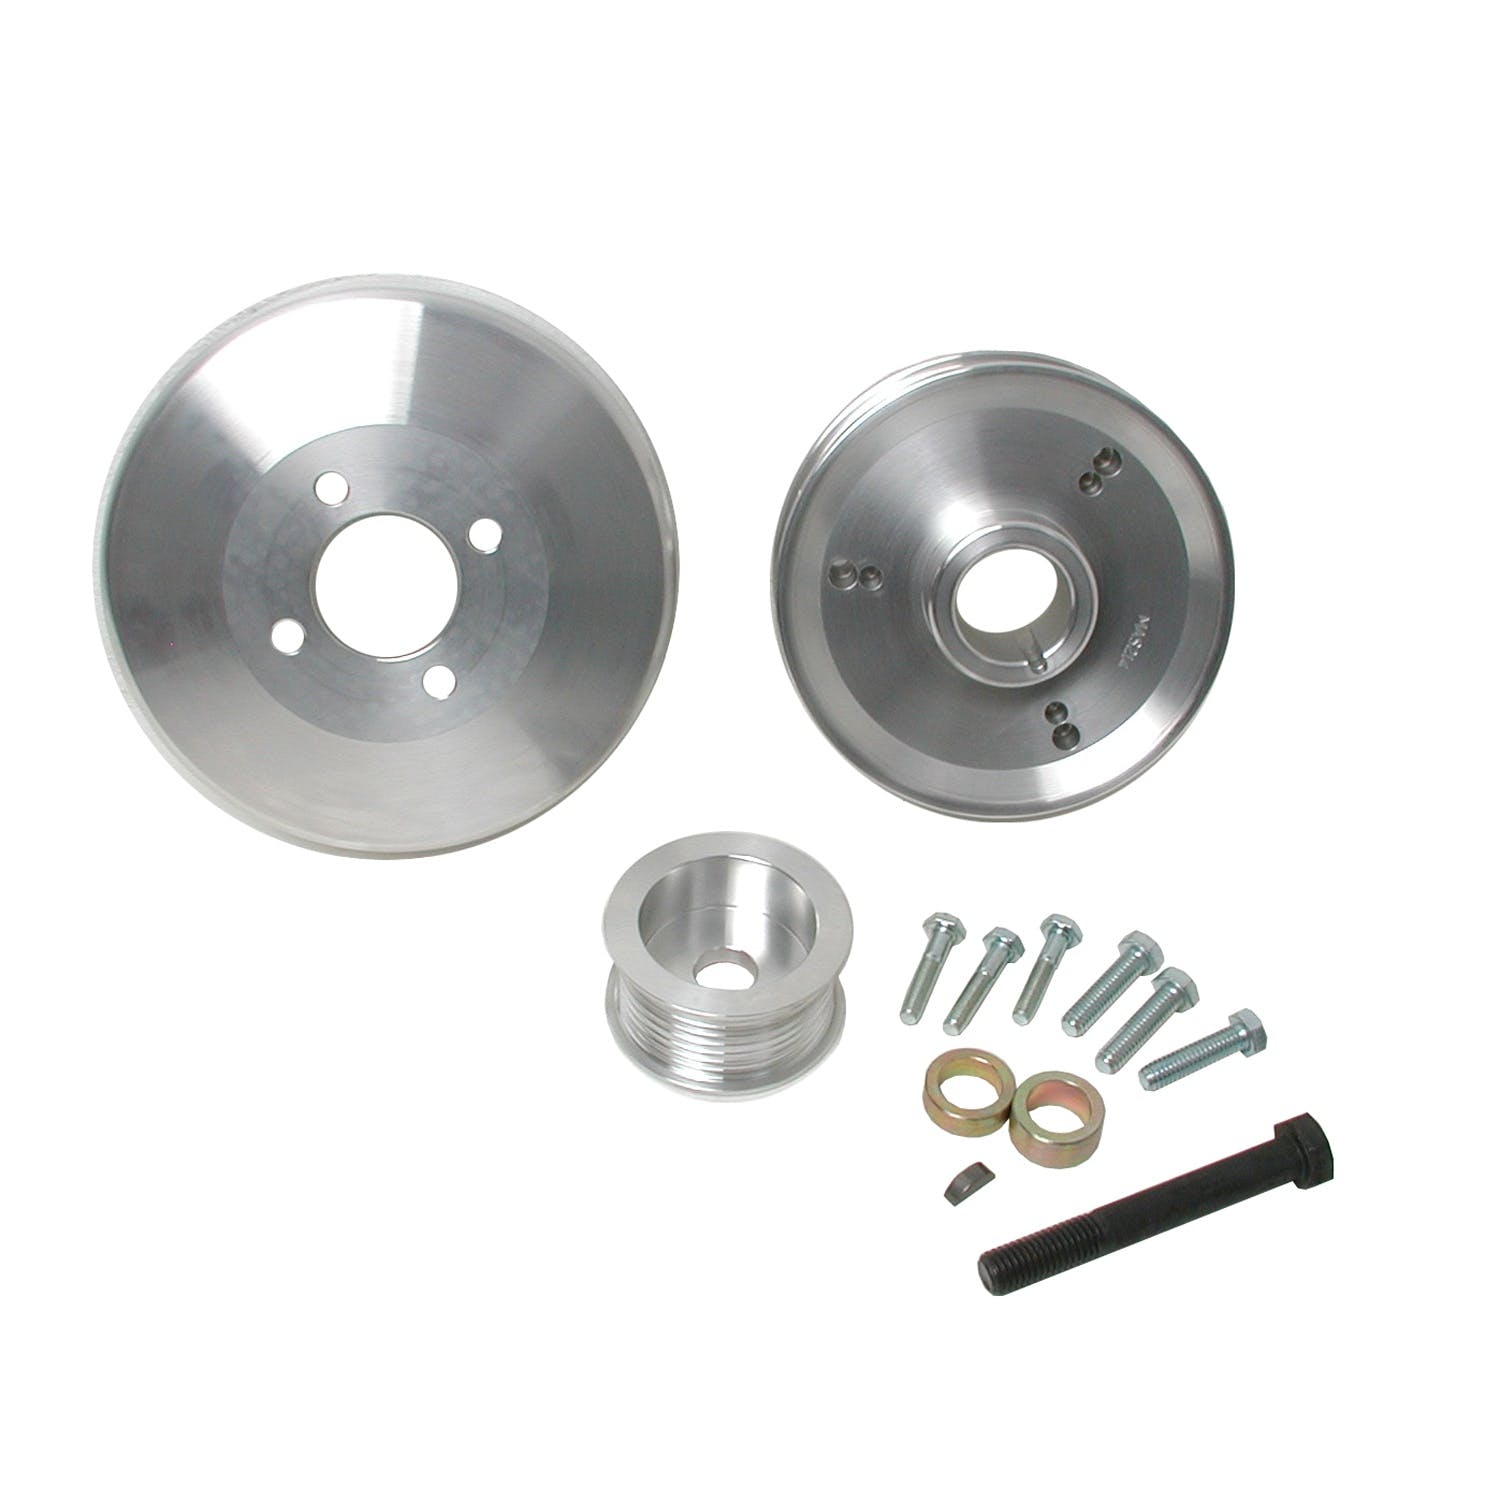 BBK Performance Parts 15550 Power-Plus Series Underdrive Pulley System